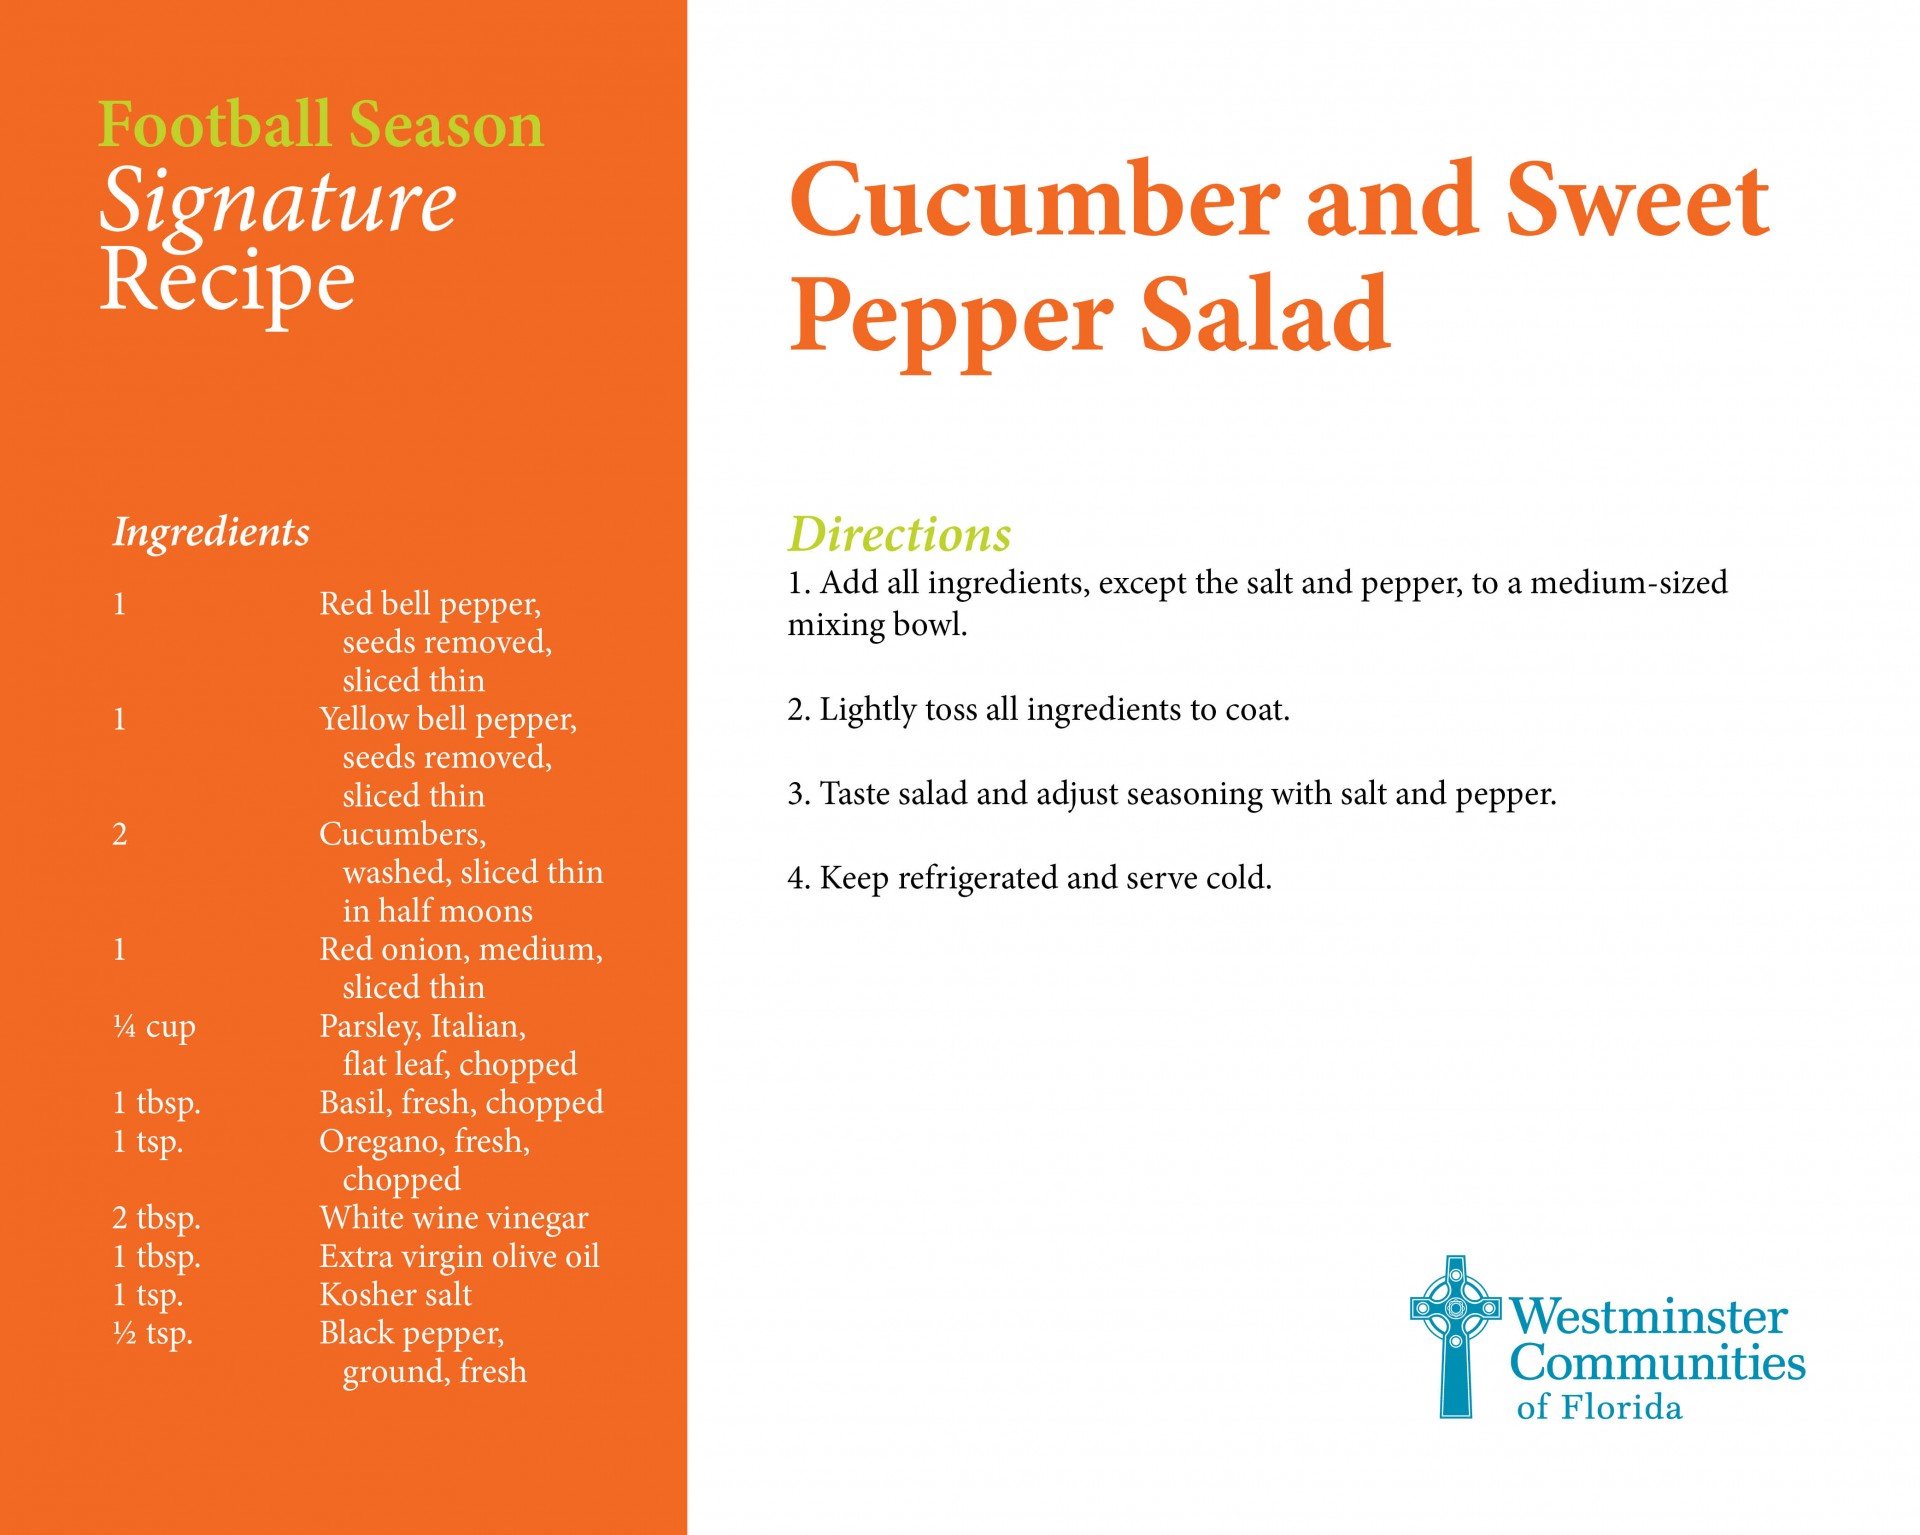 Our Signature Cucumber and Sweet Pepper Salad